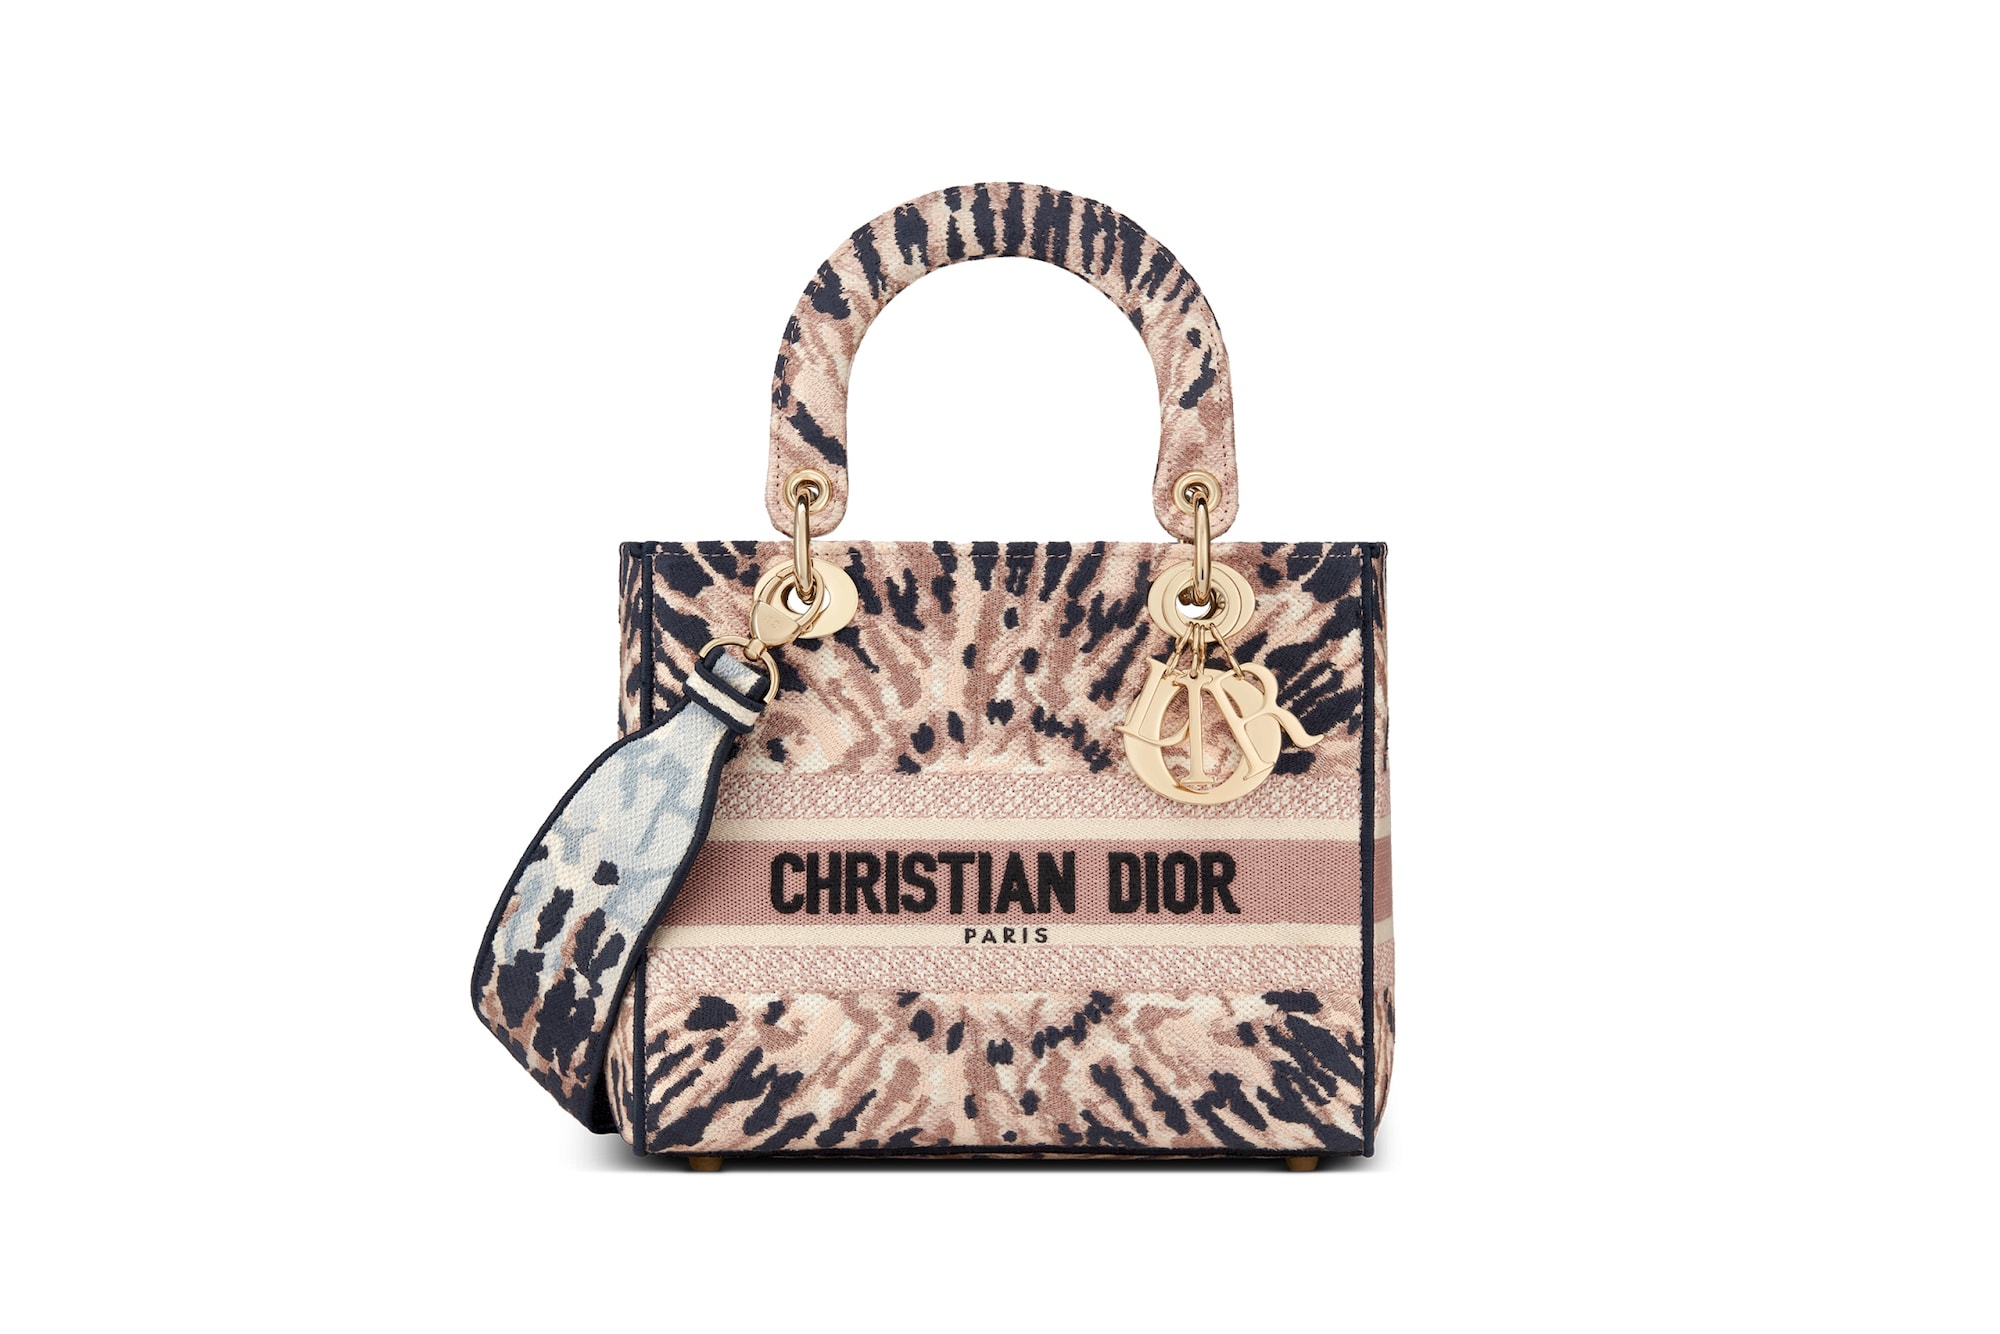 Dior Cruise 2021 Tie-Dye Logo Bags Collection Tote Bag Montaigne Silhouette Pink Navy Blue 